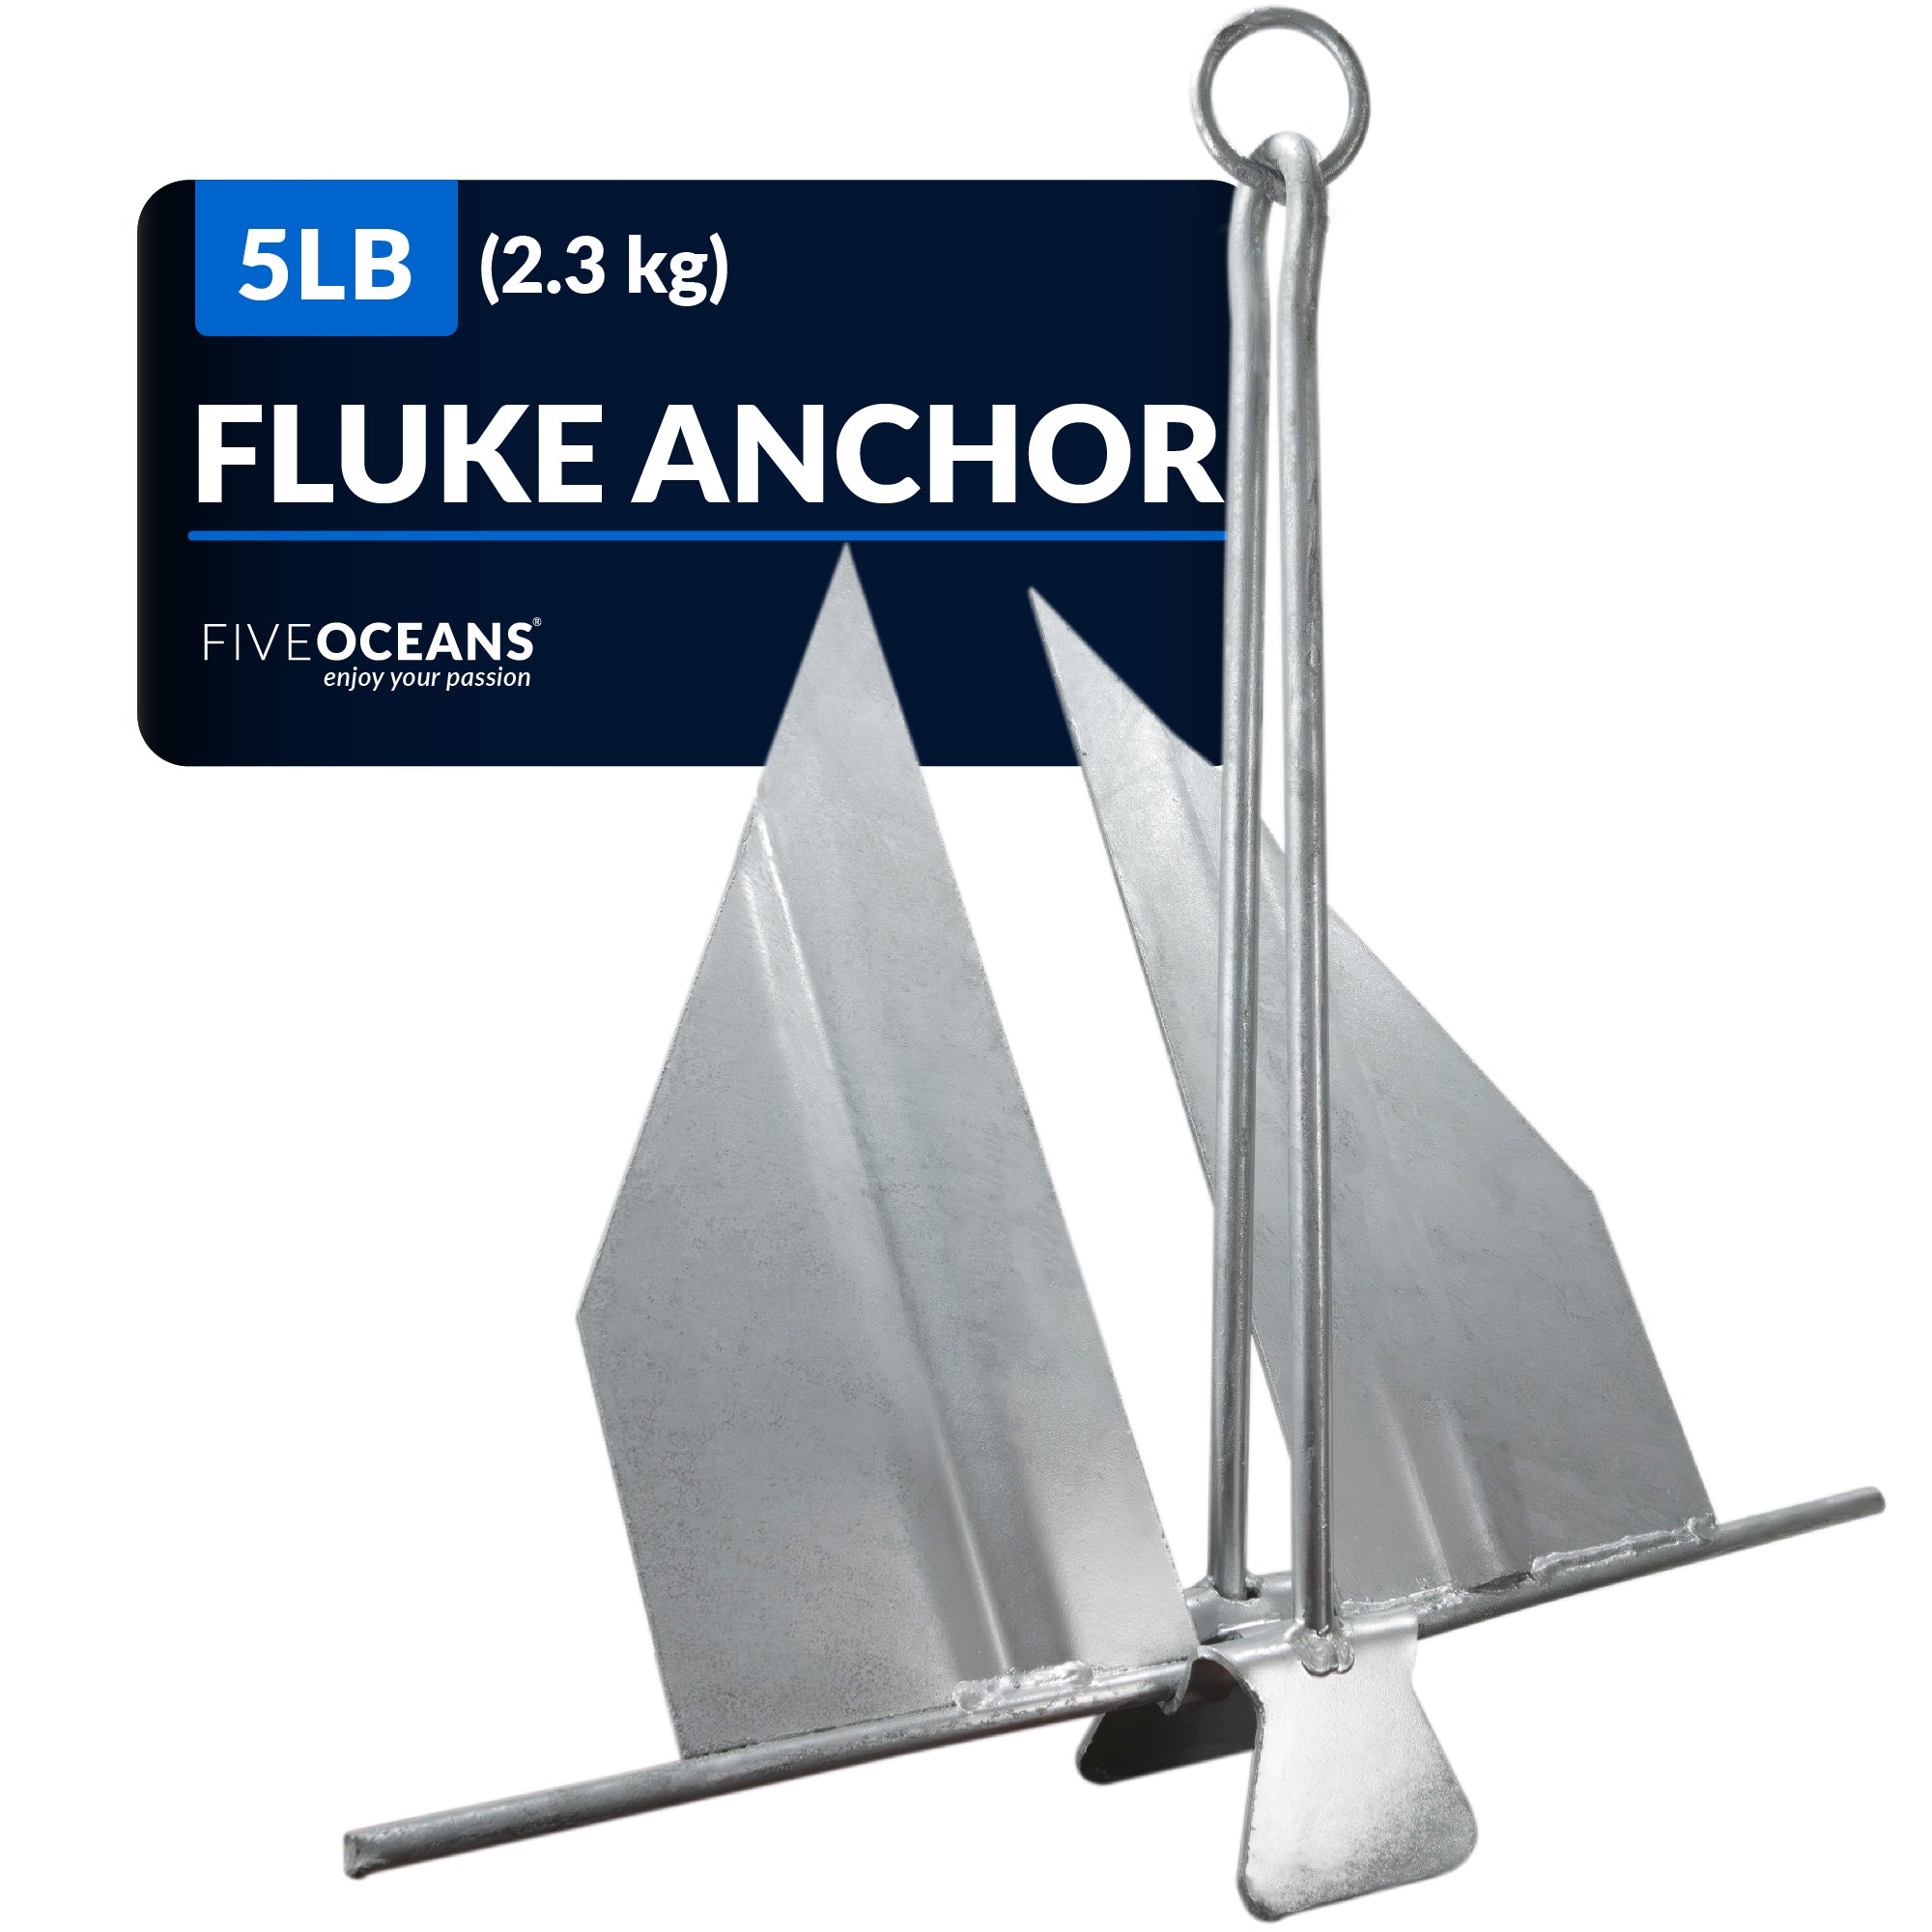 Kimpex Galvanized #8 Cast Iron Fluke Claw Anchor Kit w/50' of Anchor Line  15 lbs